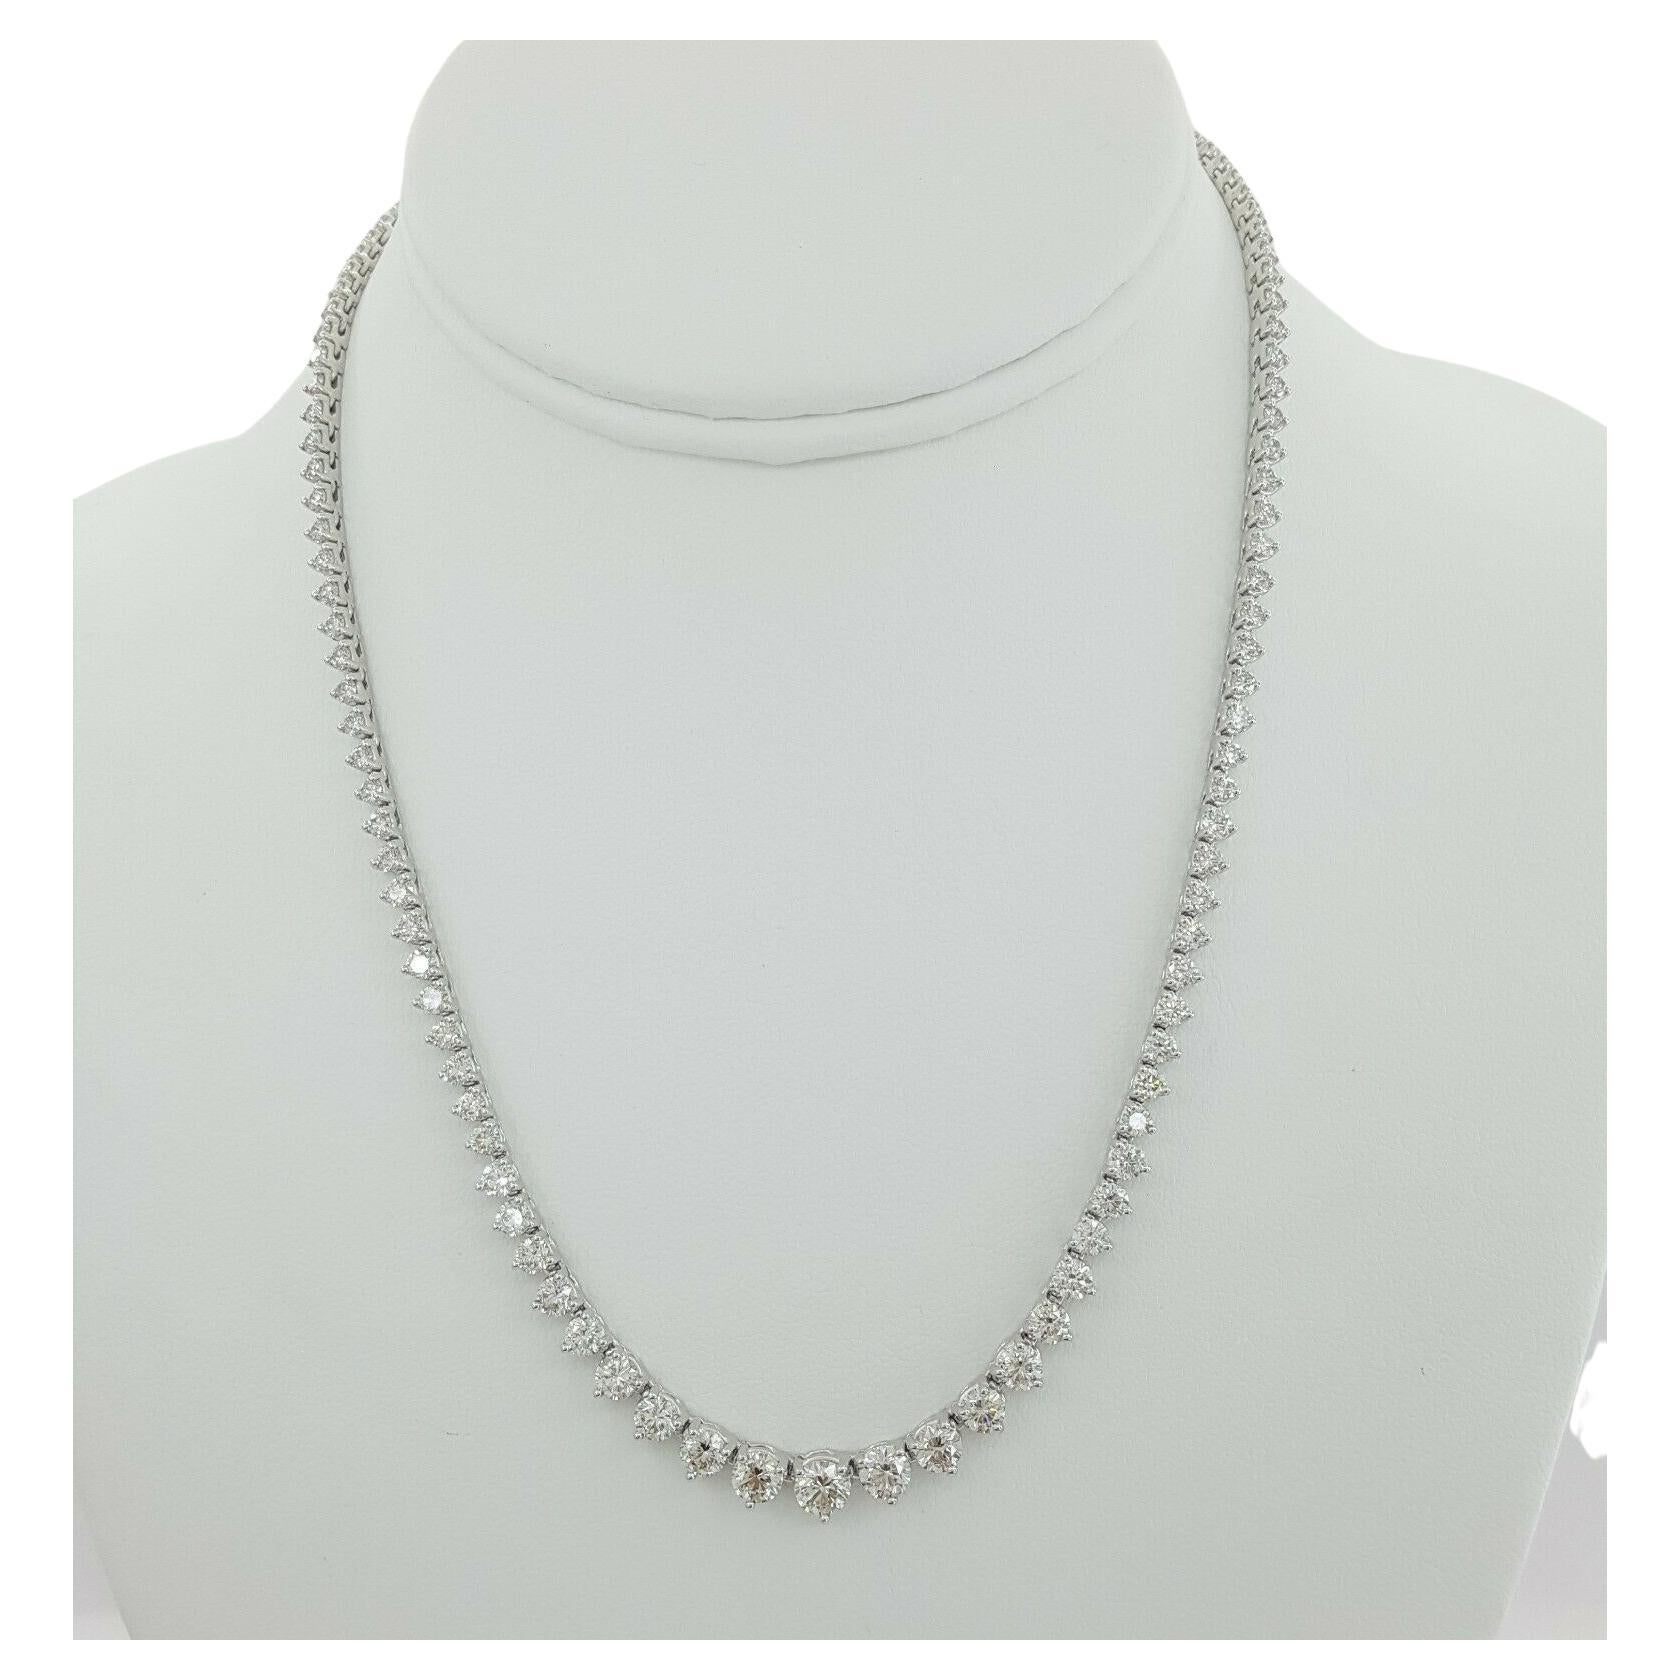 This timelessly elegant riviera necklace dazzles with 10.97 carats of bright white, eye clean, and excellently cut diamonds. Exceptionally well cut, these diamonds are very bright and lively! The diamonds are gracefully graduated, and overall, the